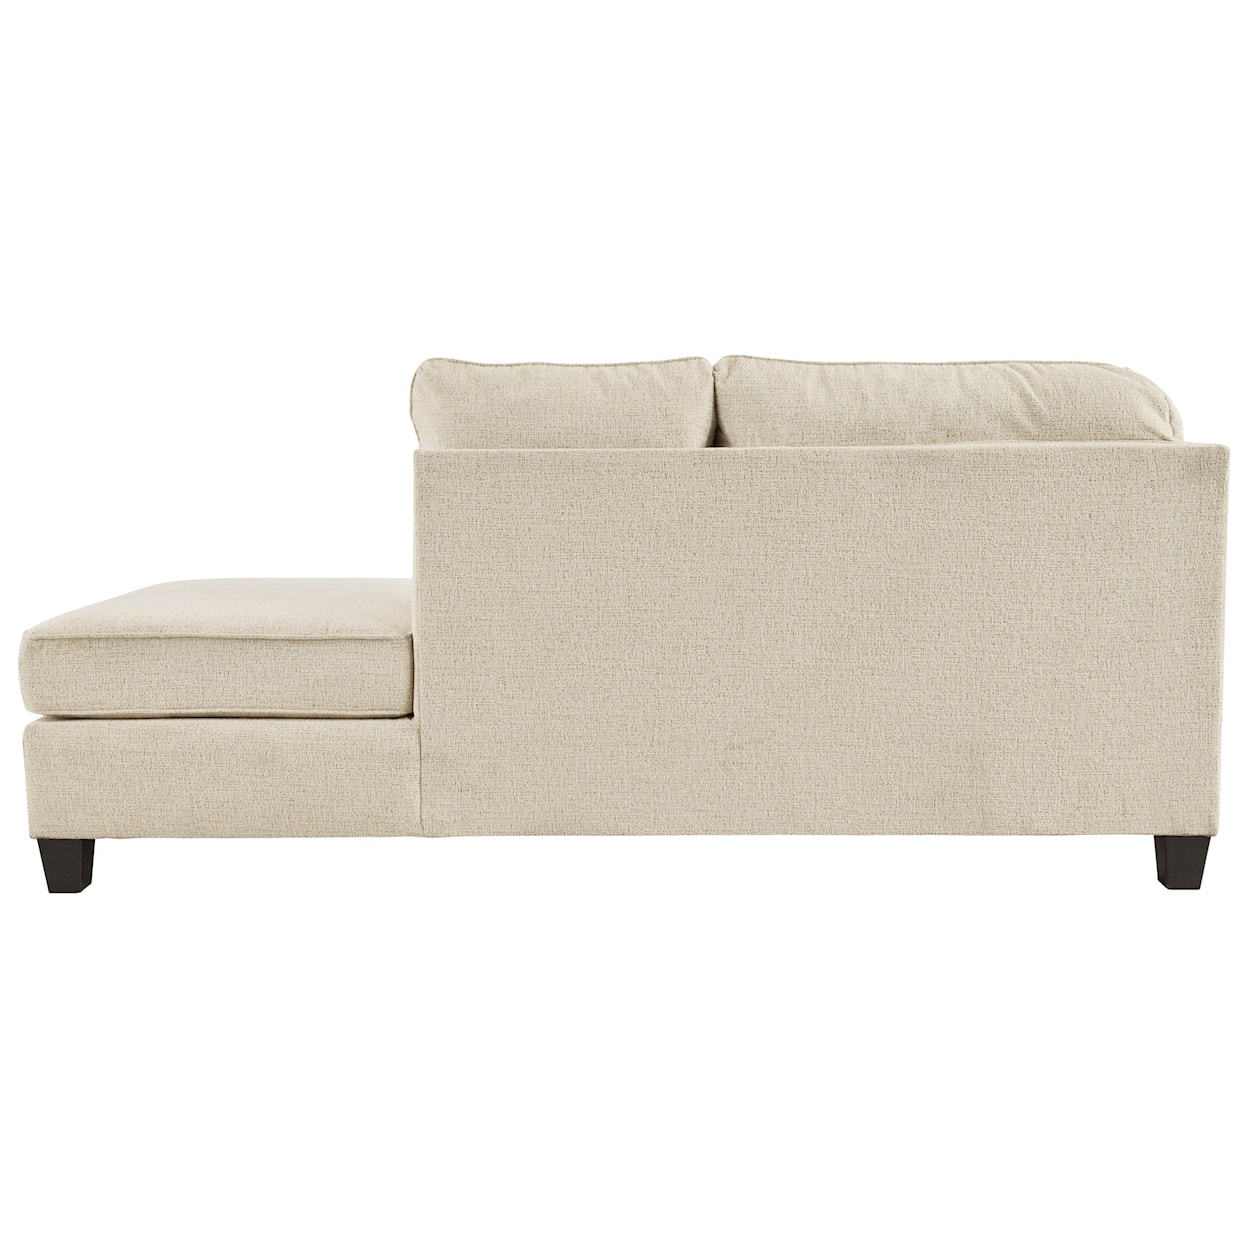 Signature Abinger 2-Piece Sectional w/ Chaise and Sleeper